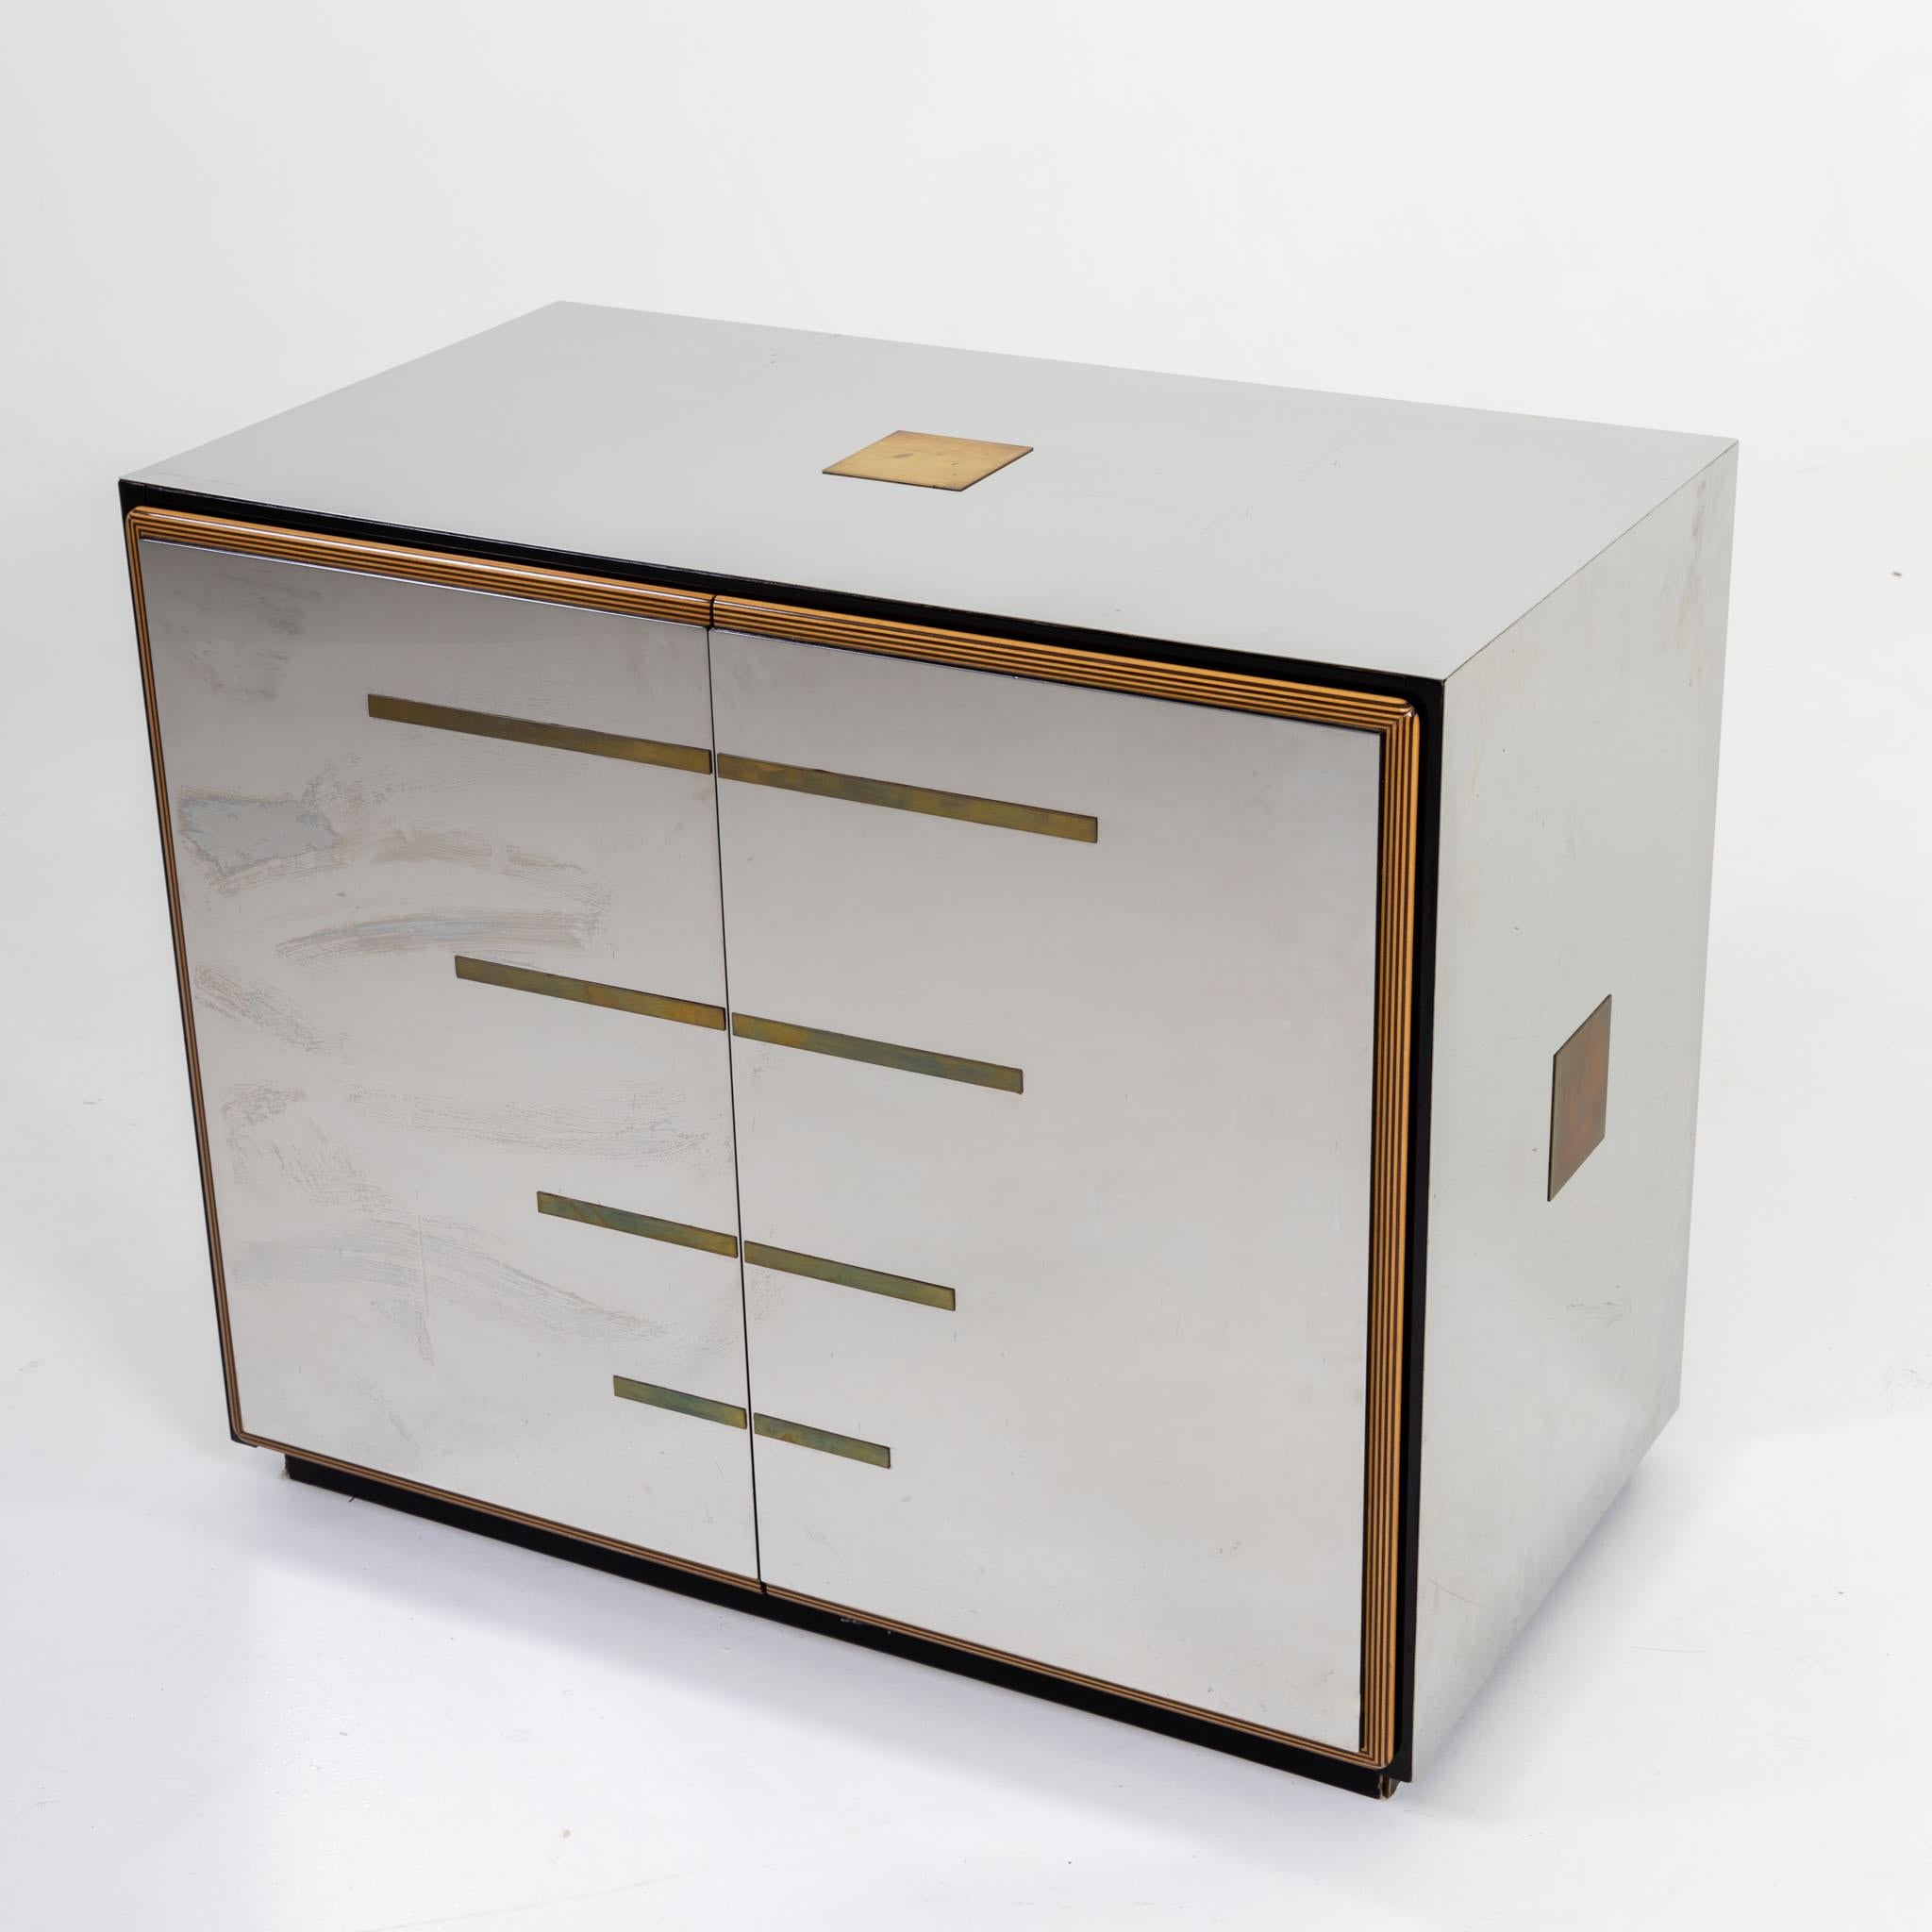 Mirrored sideboard with two doors and polished laminated wood edge and brass applications. Inside it is equipped with shelves and painted black.